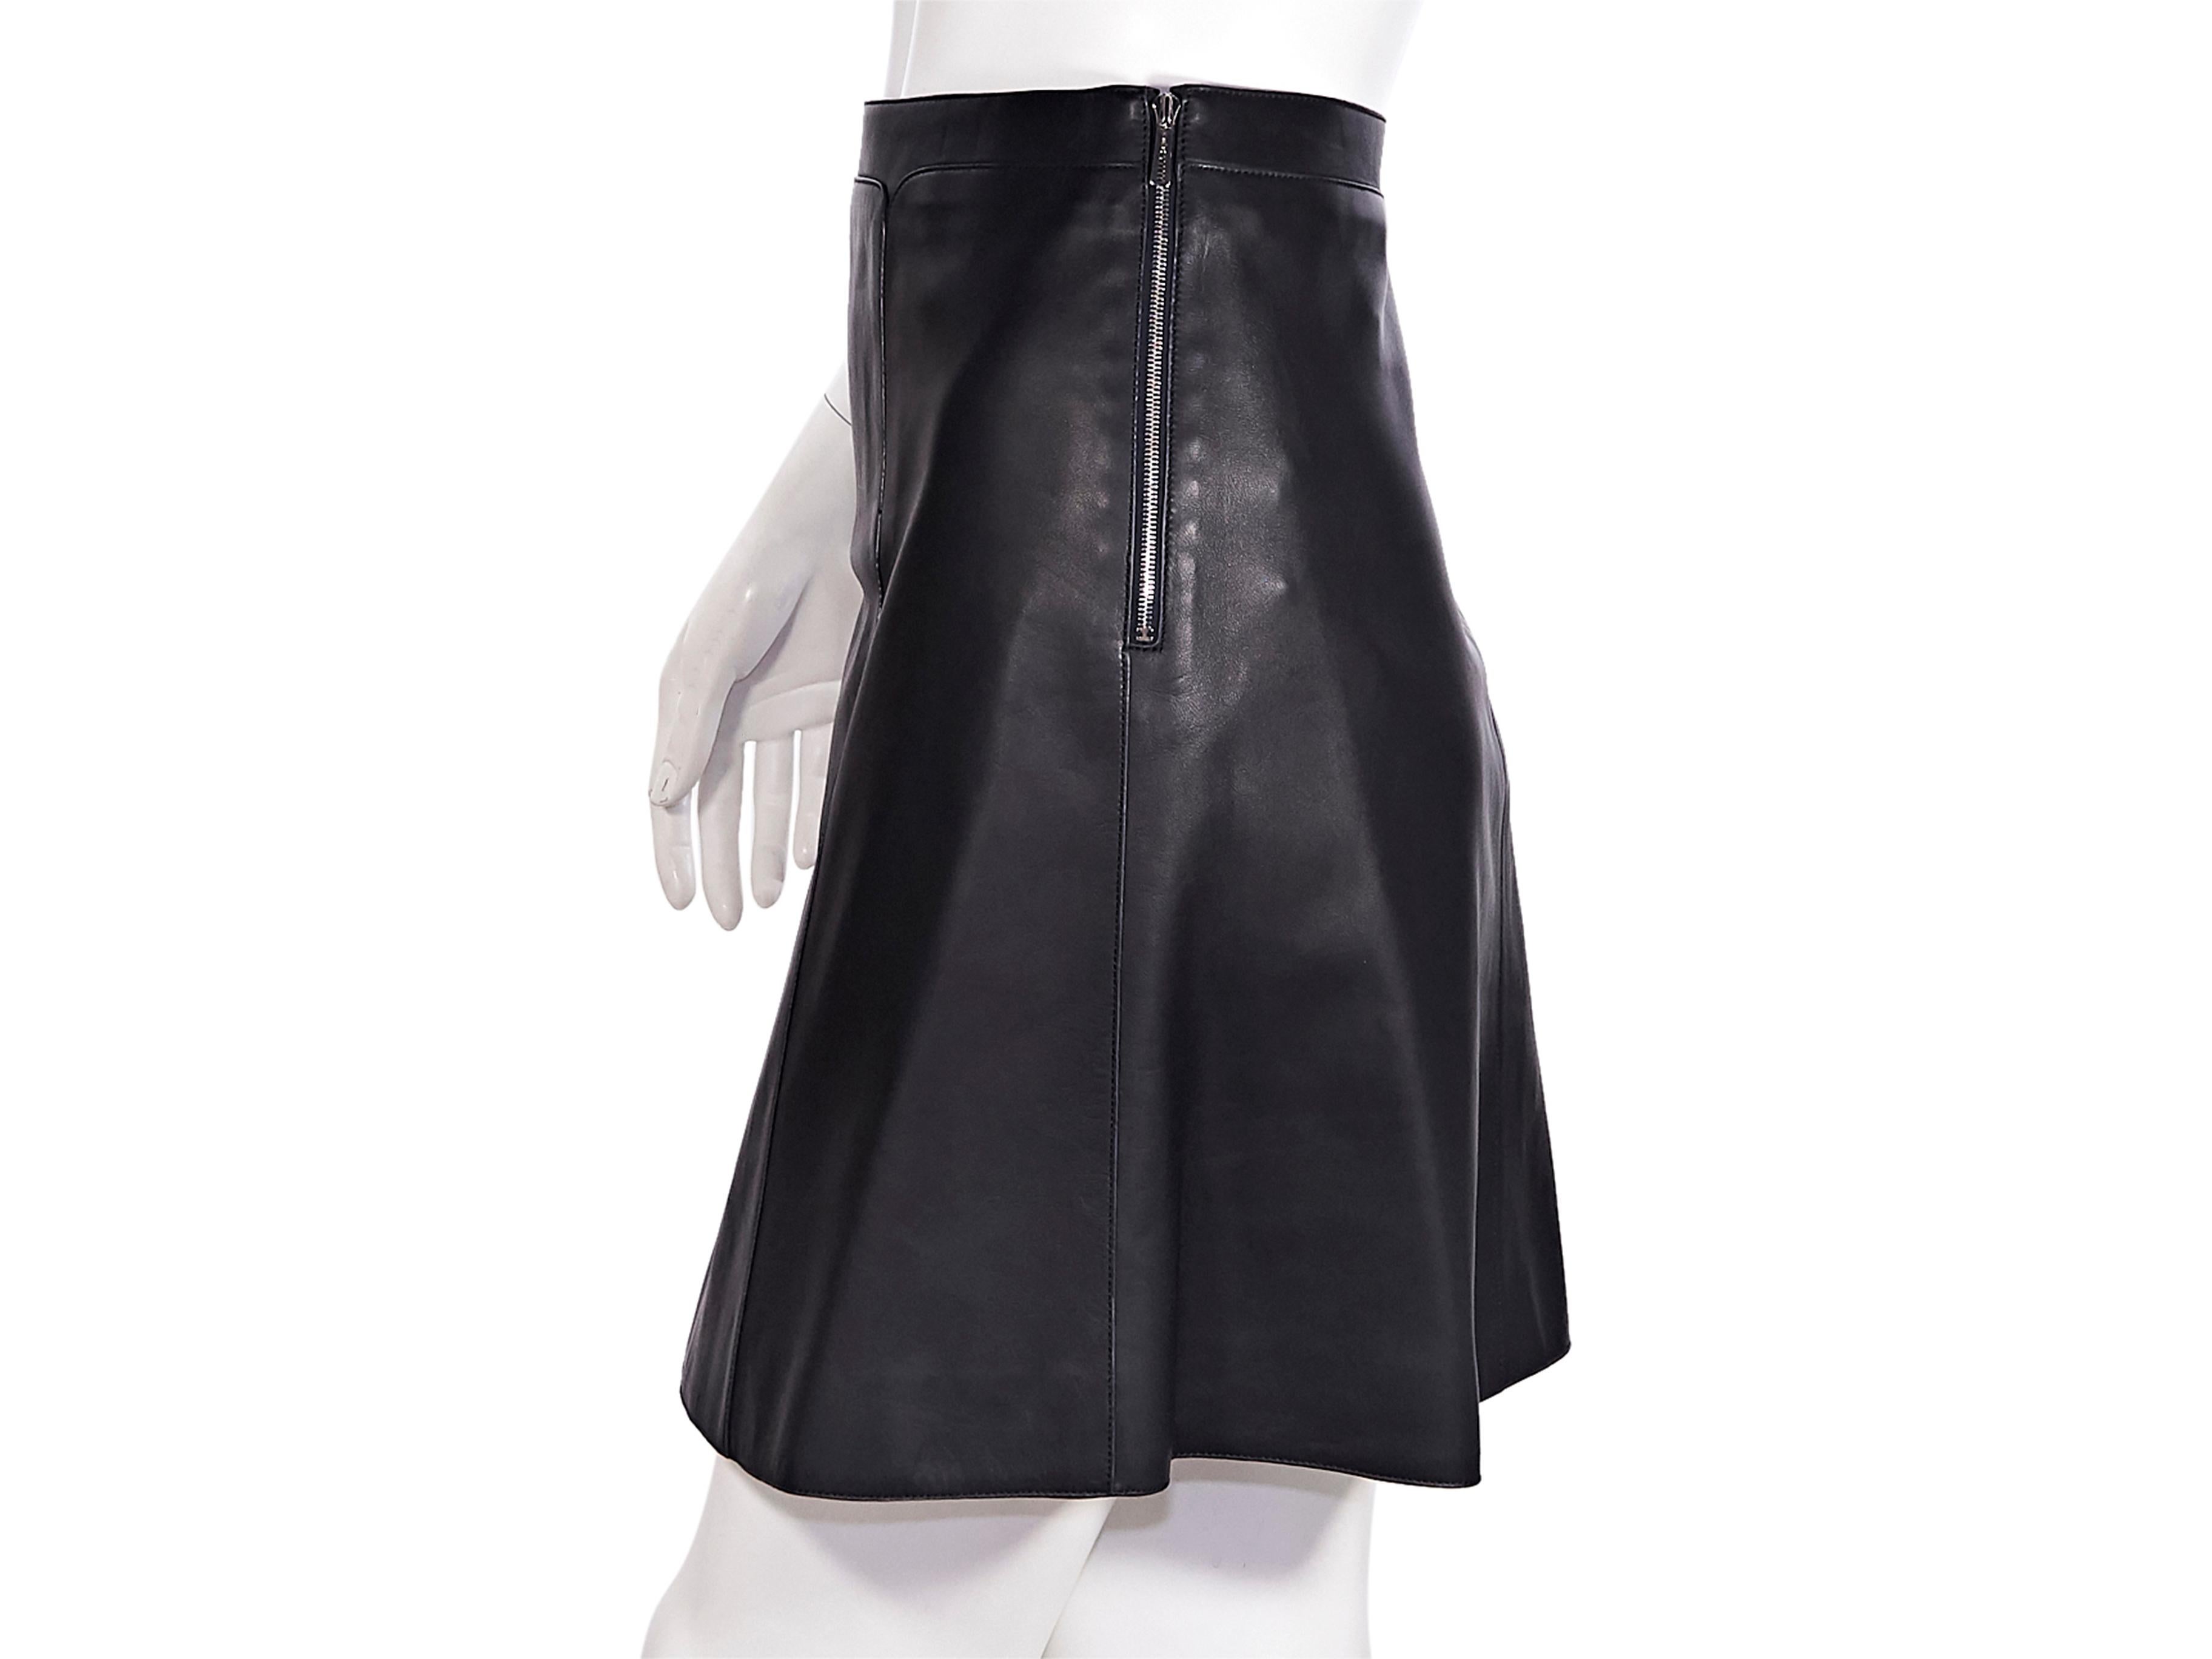 Product details:  Navy blue leather mini skirt by Hermes. High-waist. Side zip closure. Label size FR 36. 28